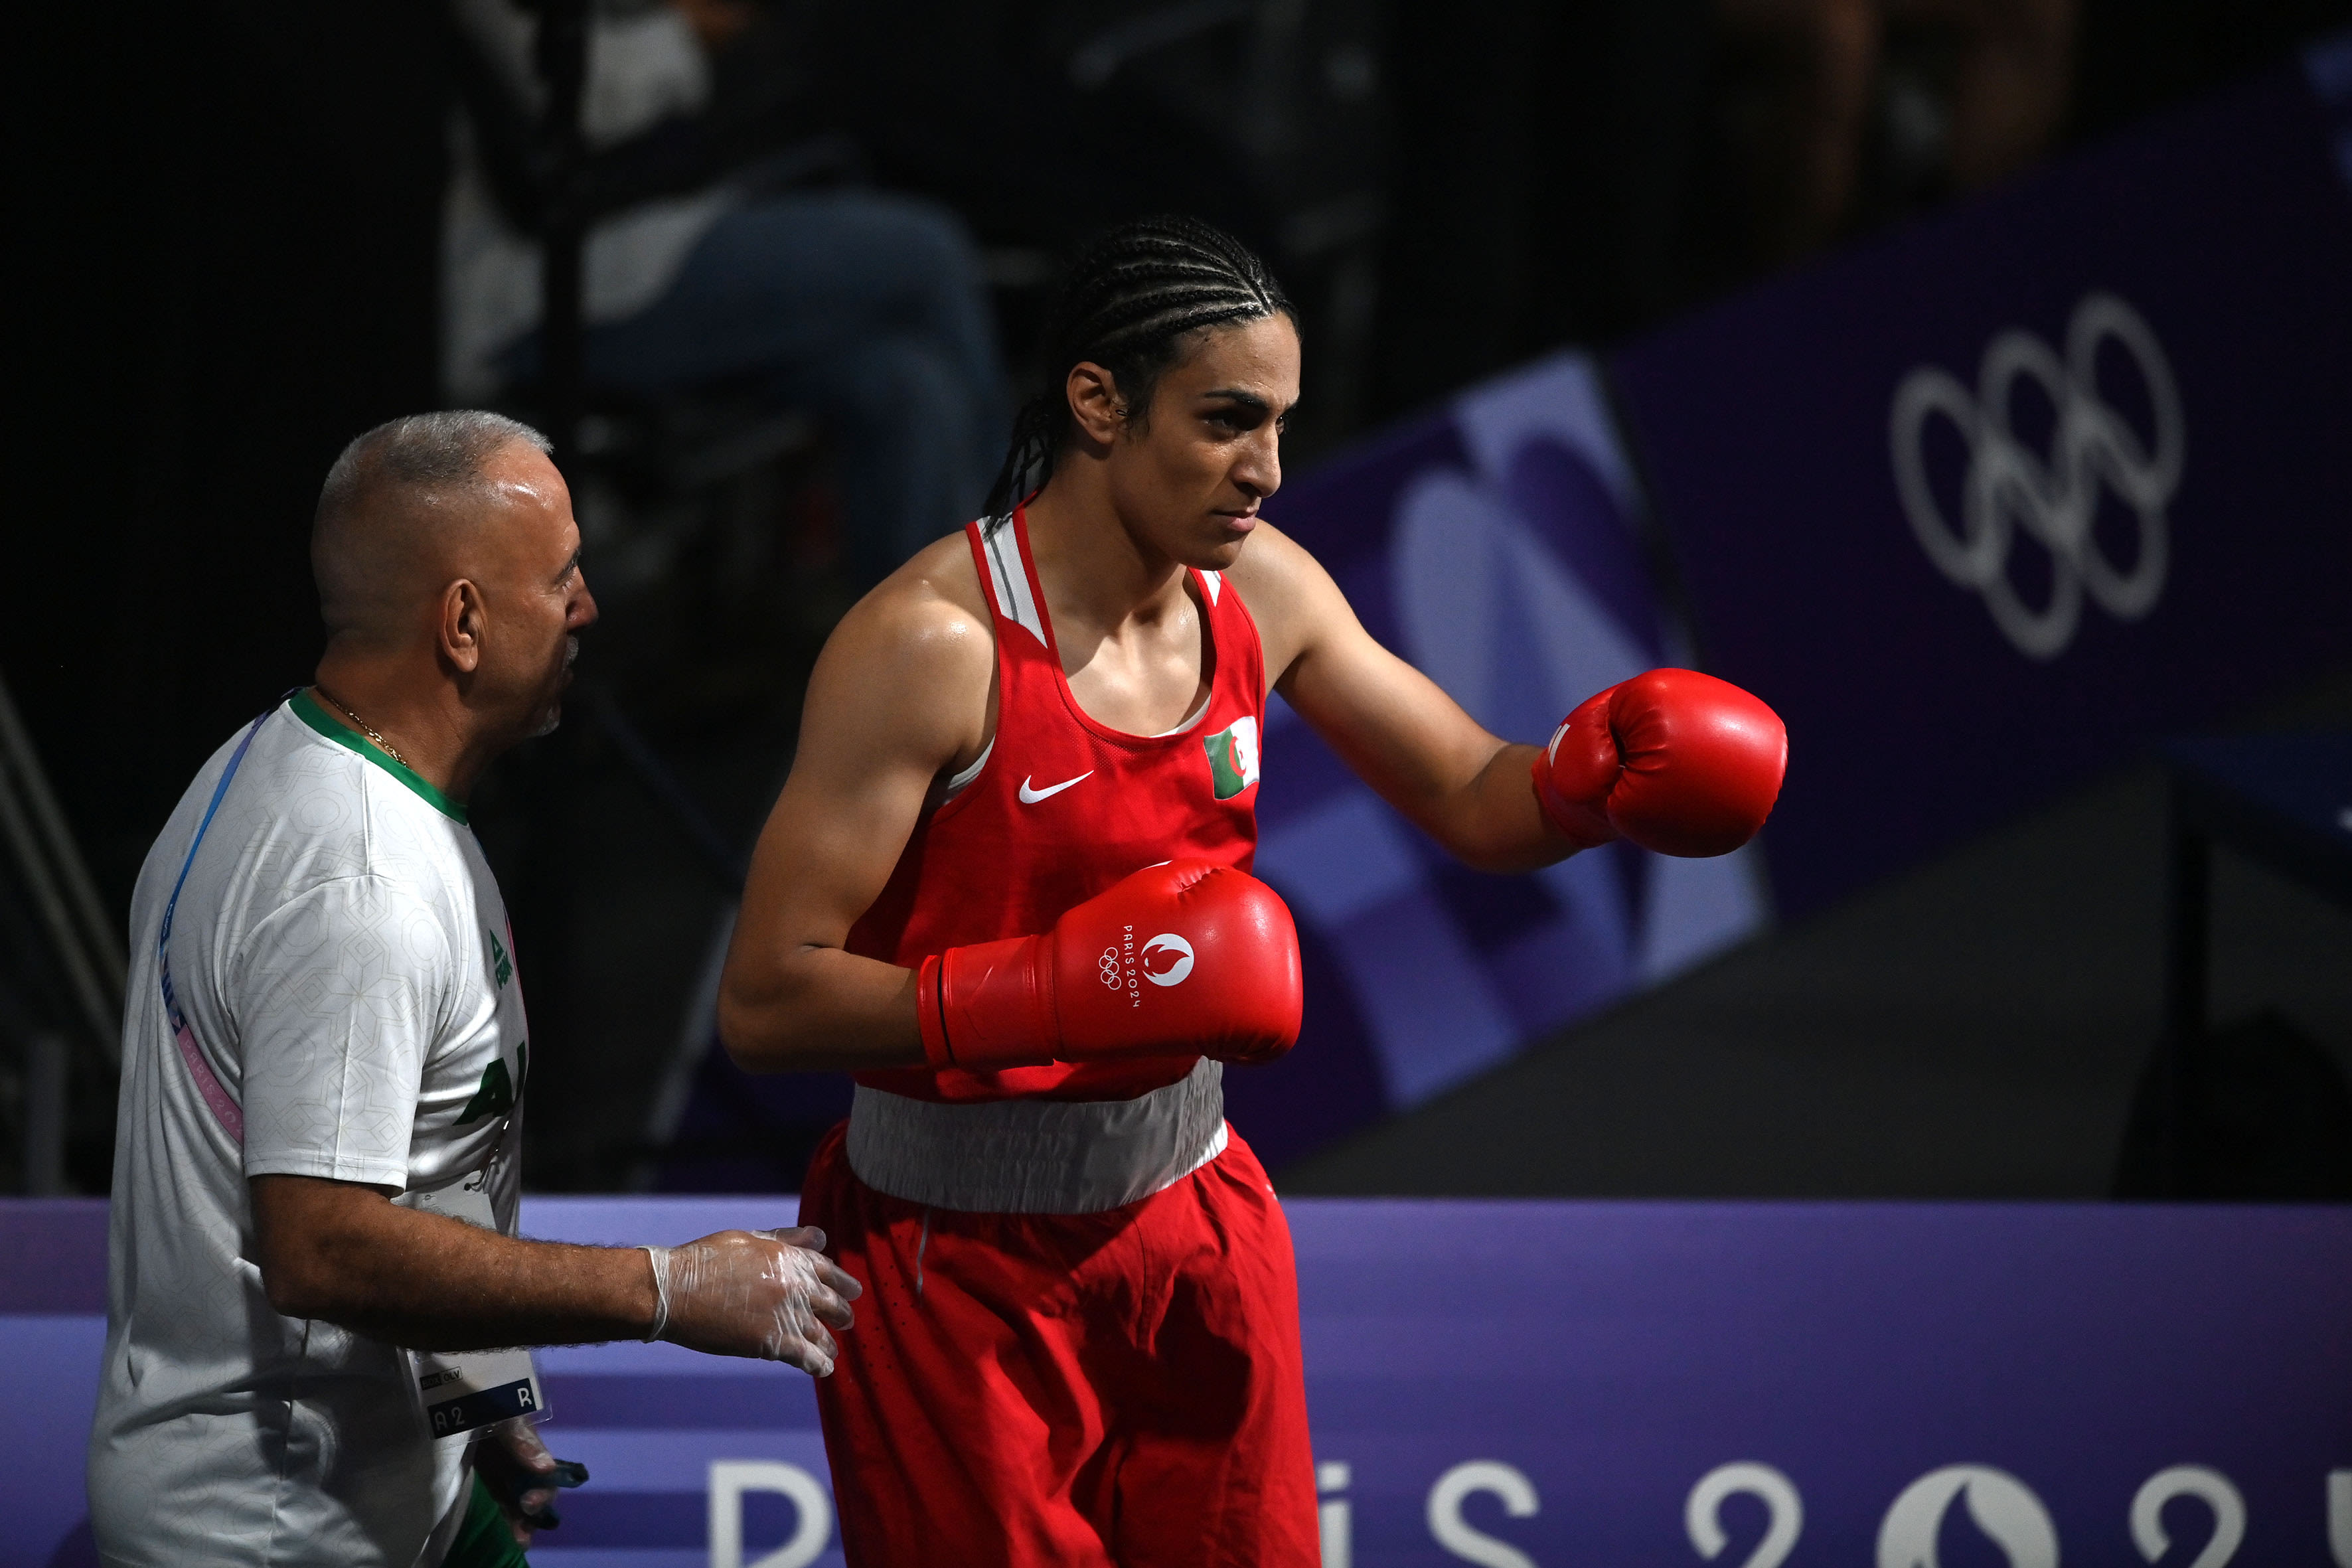 2024 Olympics: Imane Khelif, boxer at center of gender controversy, wins in unanimous decision